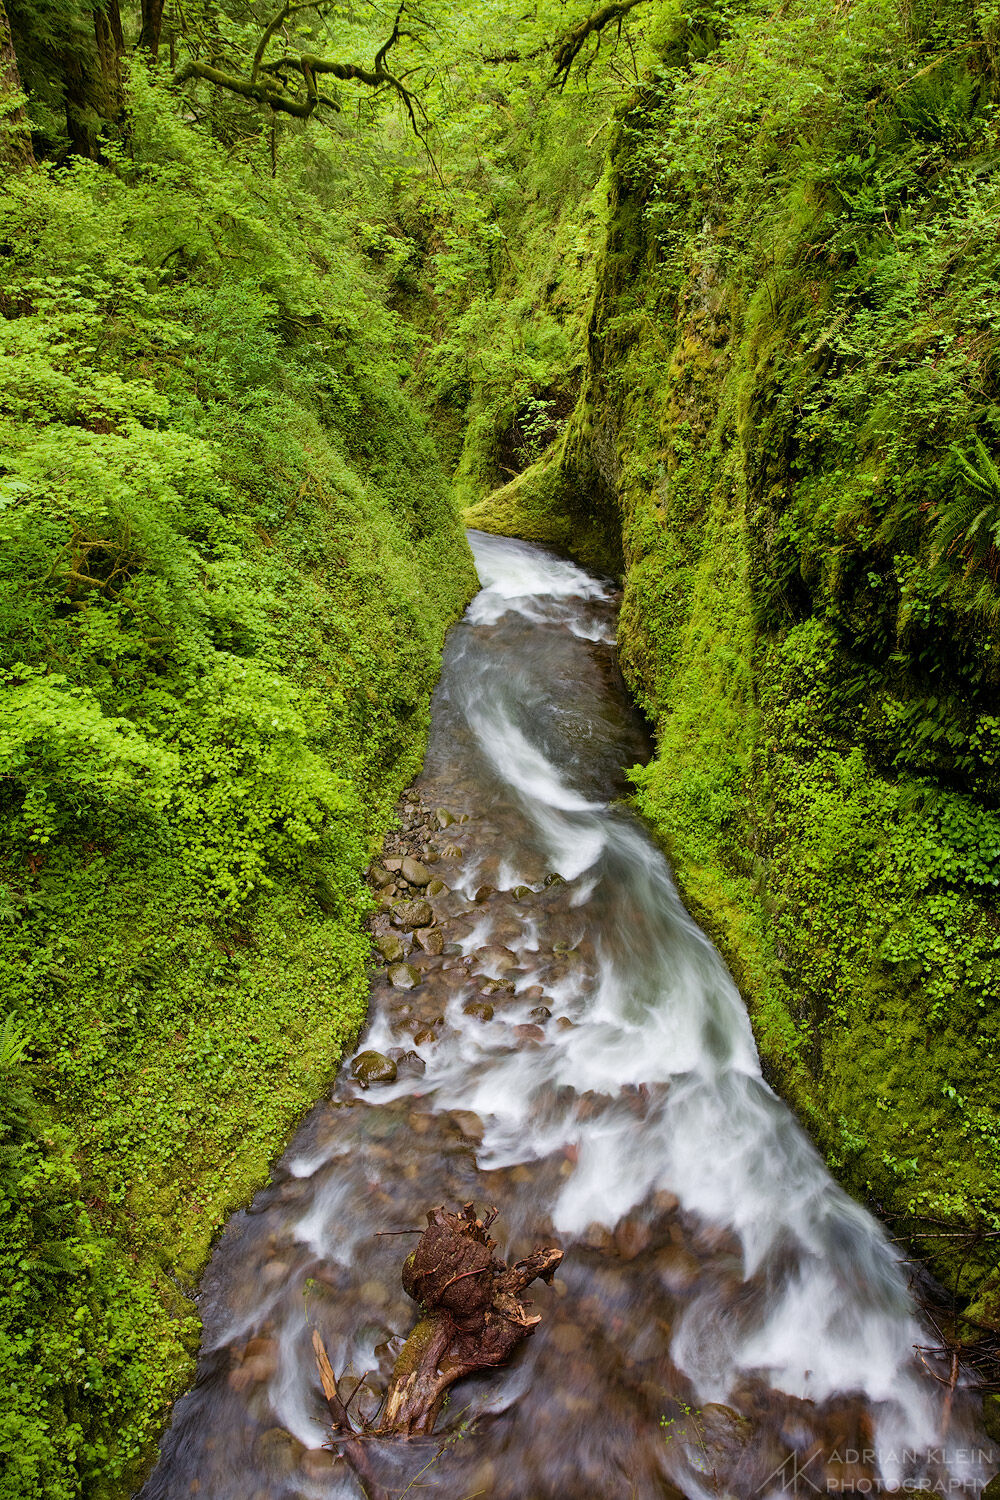 These cliff walls are filled with spring green in the Columbia River Gorge, Oregon.